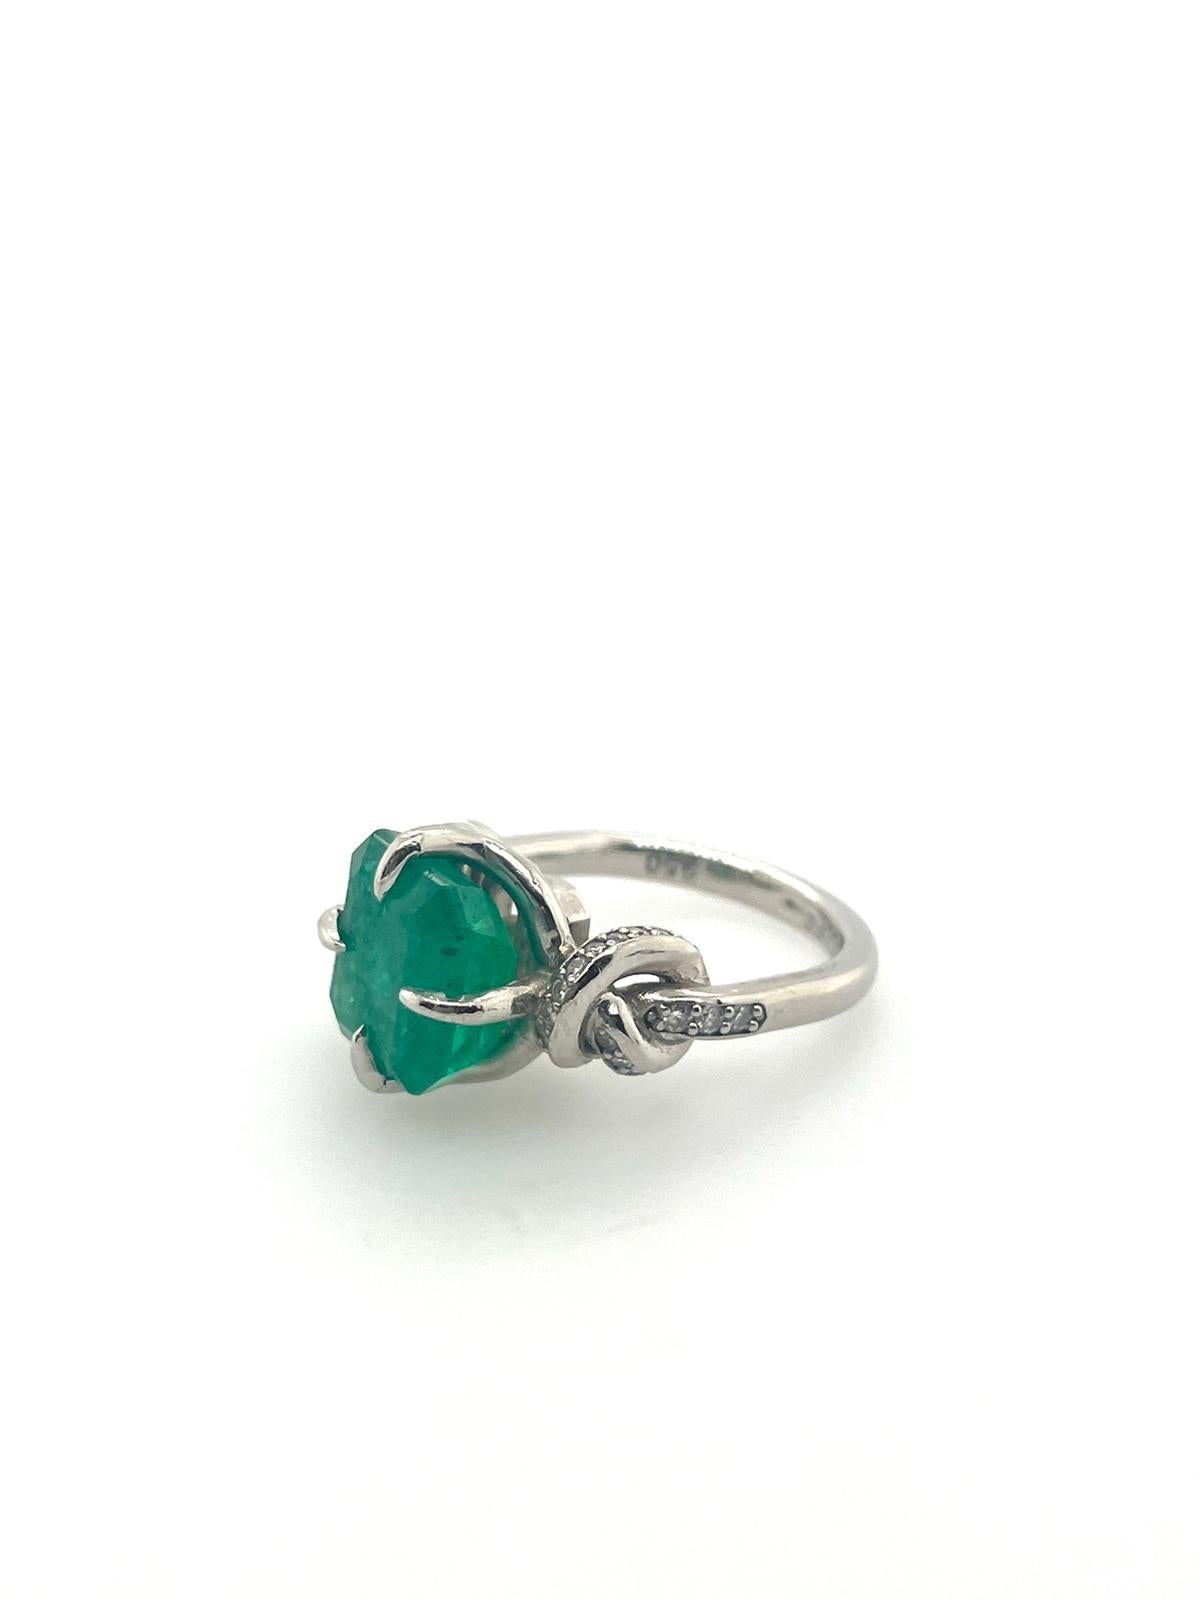 For Sale:  4ct Emerald solitaire in platinum with diamond knots  3